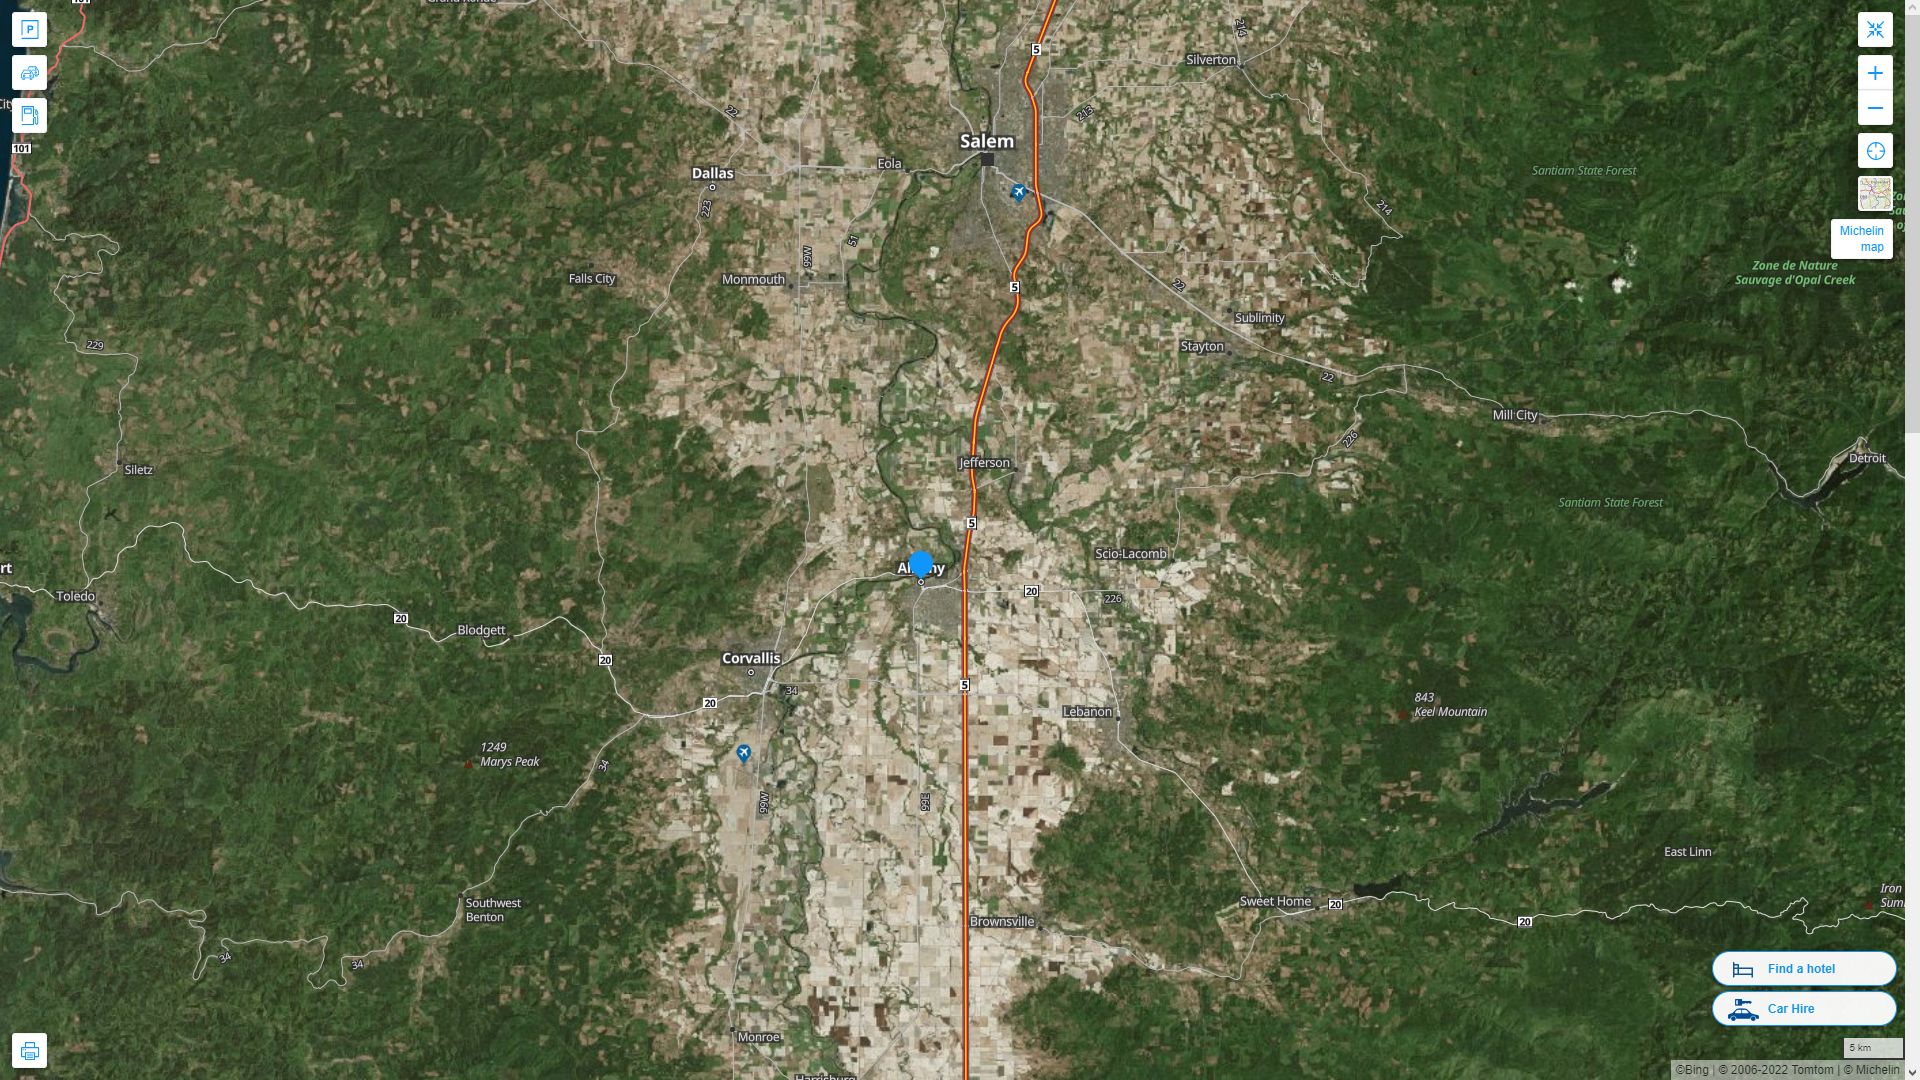 Albany Oregon Highway and Road Map with Satellite View